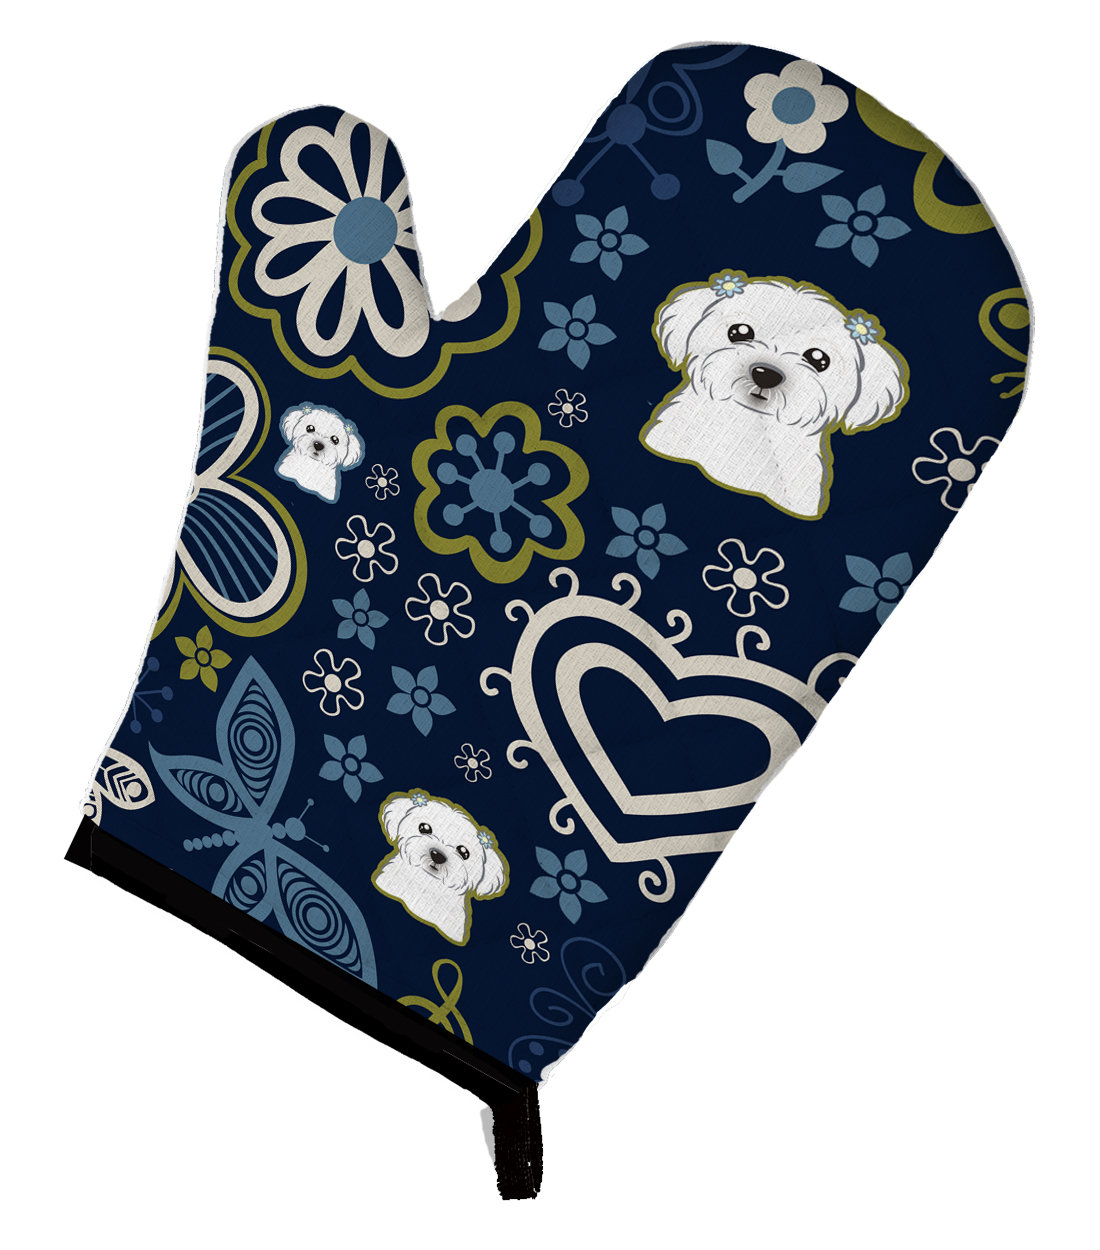 Carolines Treasures 7104OVMT Maltese Momma and Puppy Oven Mitt 12 by 8.5 Multicolor 